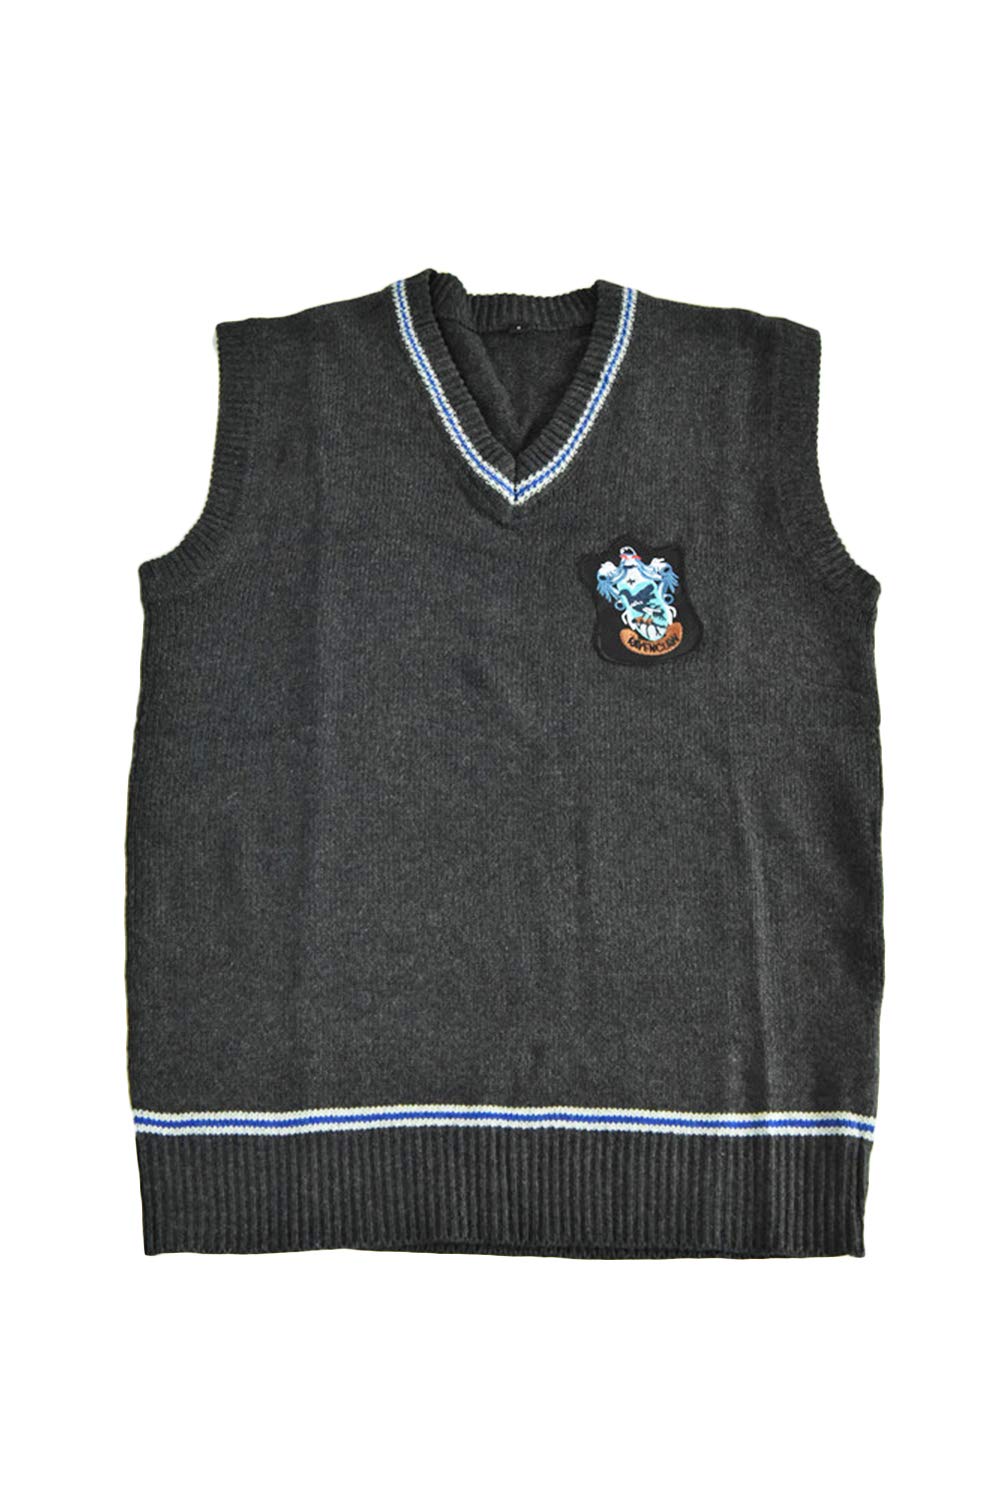 Buy Harry Gryffindor Ravenclaw Hufflepuff Waistcoat Sweater Cosplay Costume Costume (Hufflepuff % Comma % S) from Japan - Buy authentic Plus exclusive items from Japan | ZenPlus